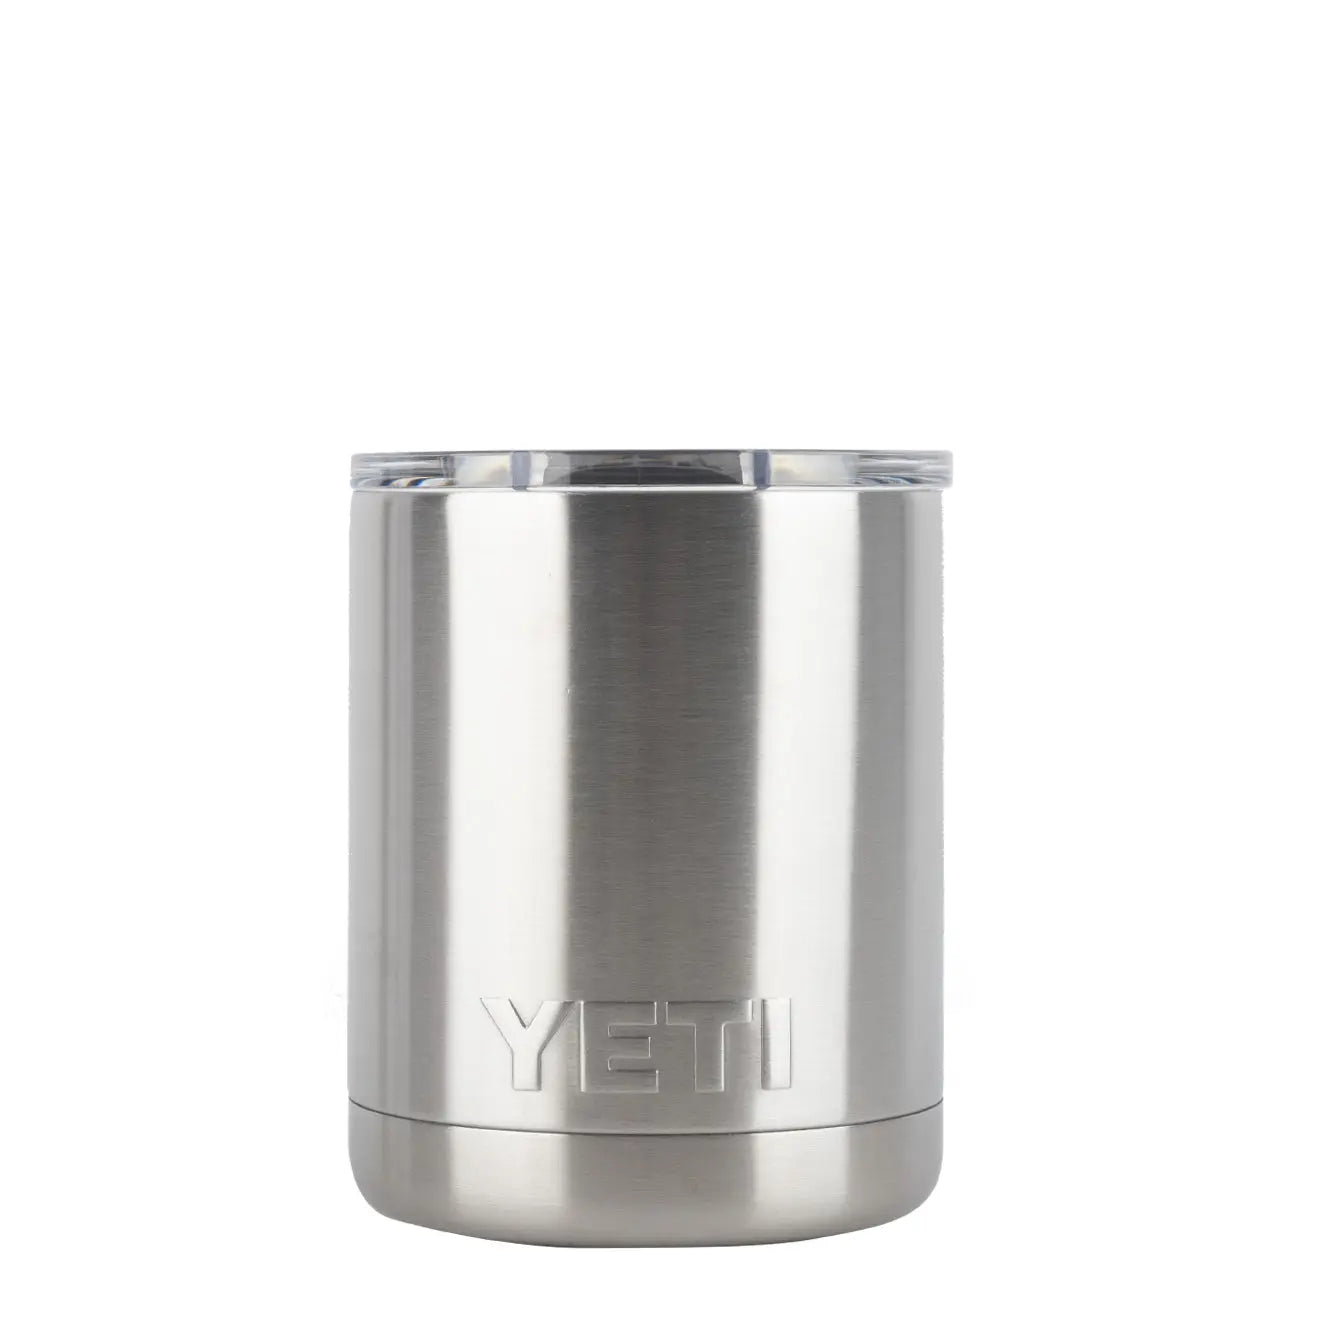 Steel　Yards　Lowball　Rambler　YETI　MS　Store　Cup　Stainless　Menswear